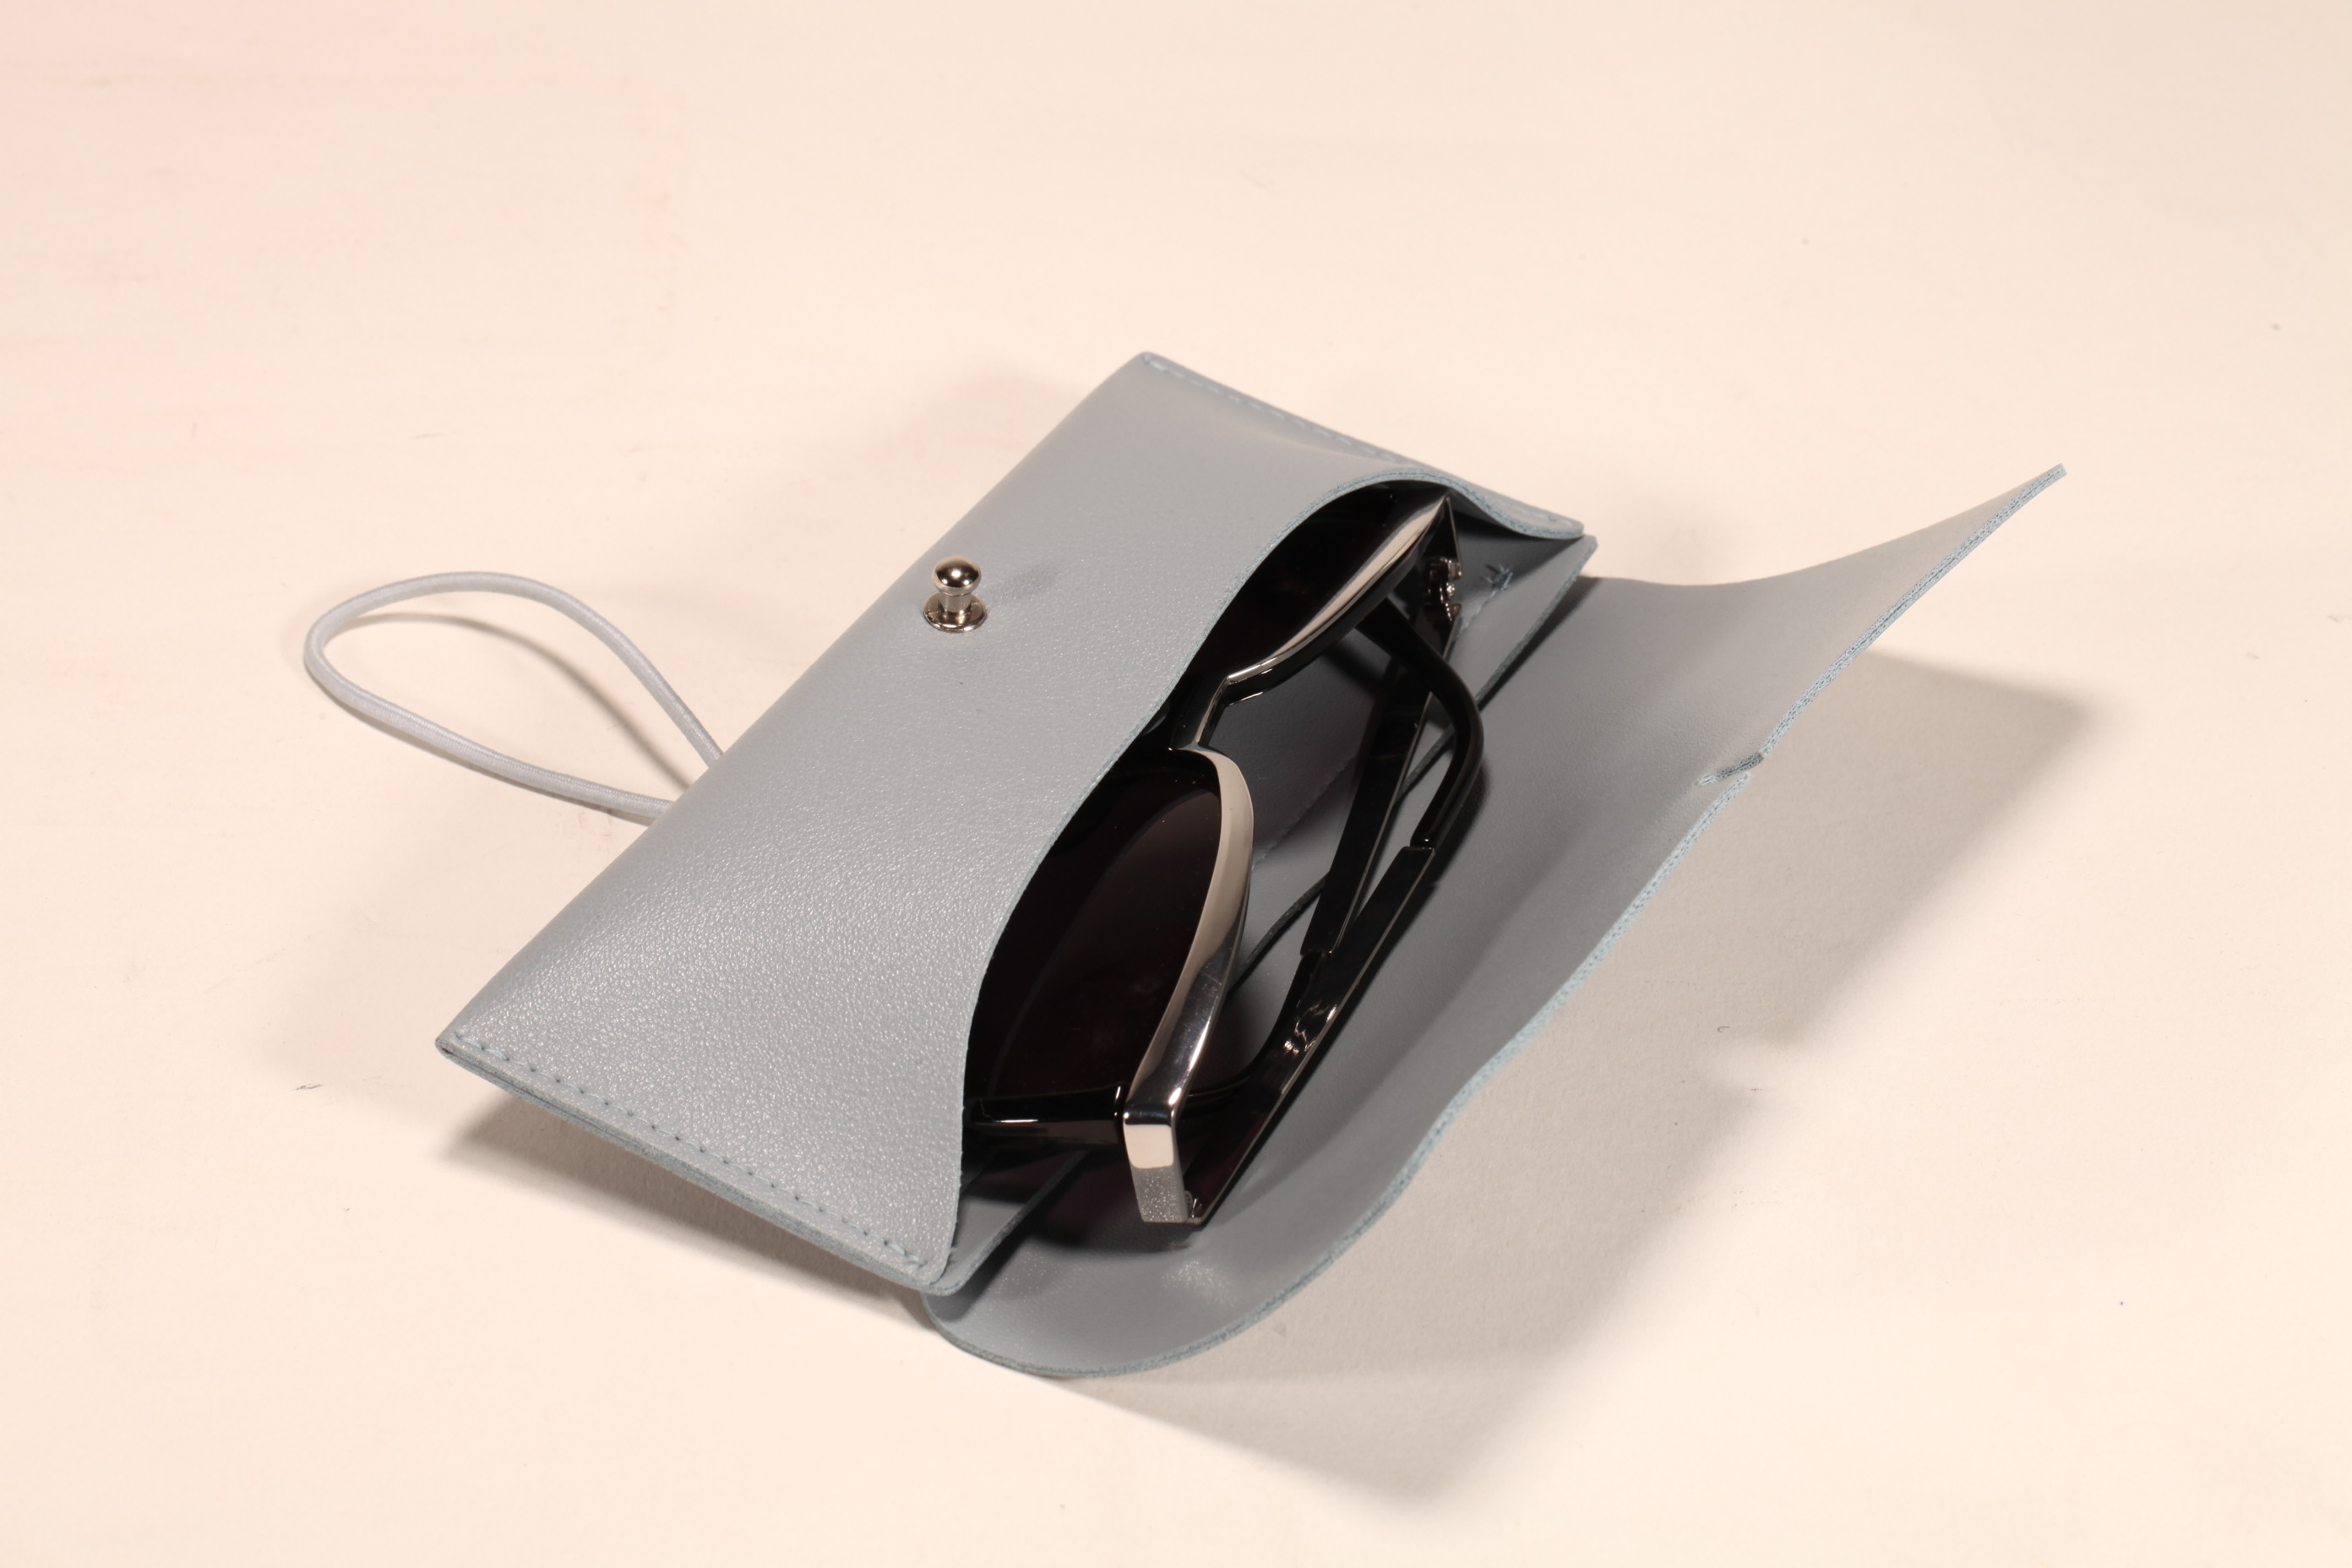 A soft case of light gray glasses, printed with LOGO and ICONS, small and delicate